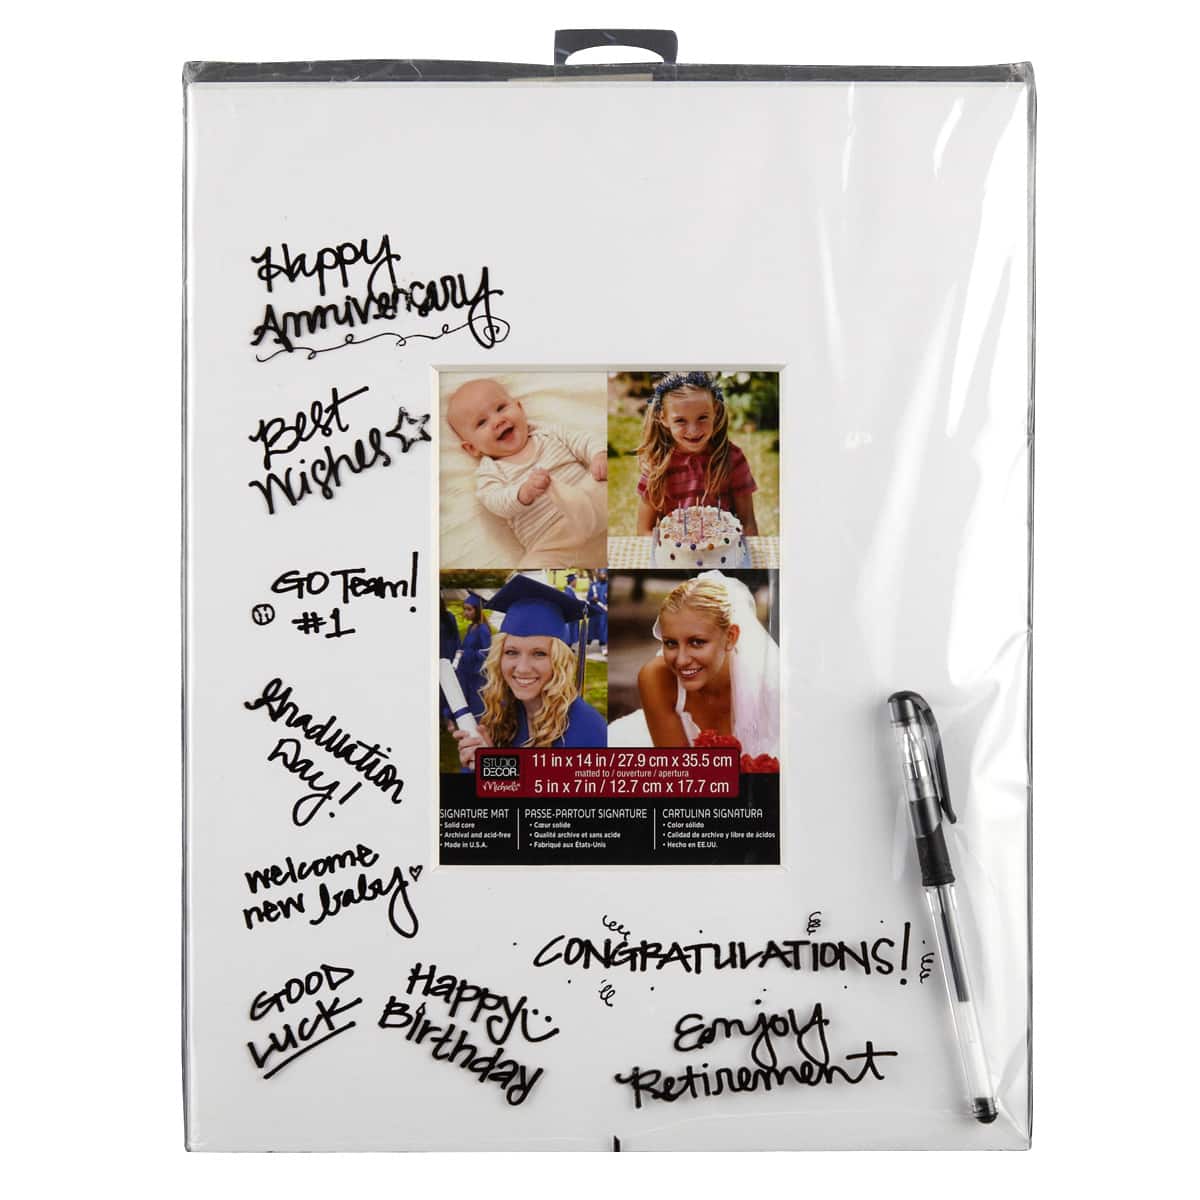 Hobby Lobby - Signature mats are back and more popular than ever this  wedding season! For larger weddings, use multiple frames to fit more  signatures without sacrificing on aesthetics. With this collage